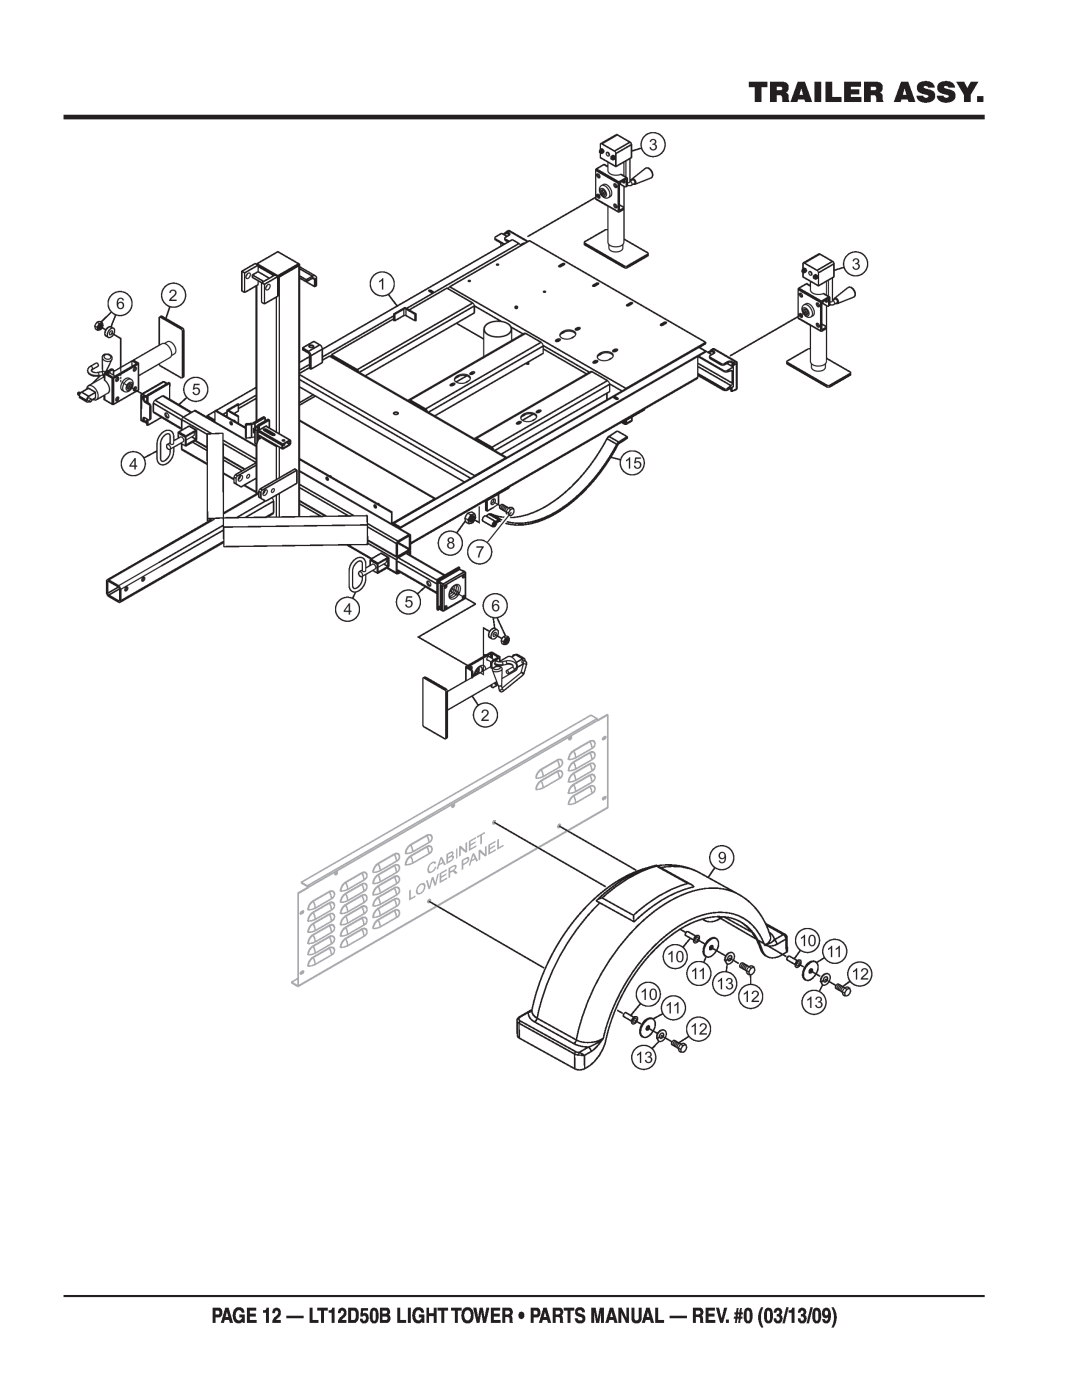 Multiquip manual Trailer Assy, PAGE 12 - LT12D50B LIGHT TOWER PARTS MANUAL - REV. #0 03/13/09, Cabinet, Panel, Lower 